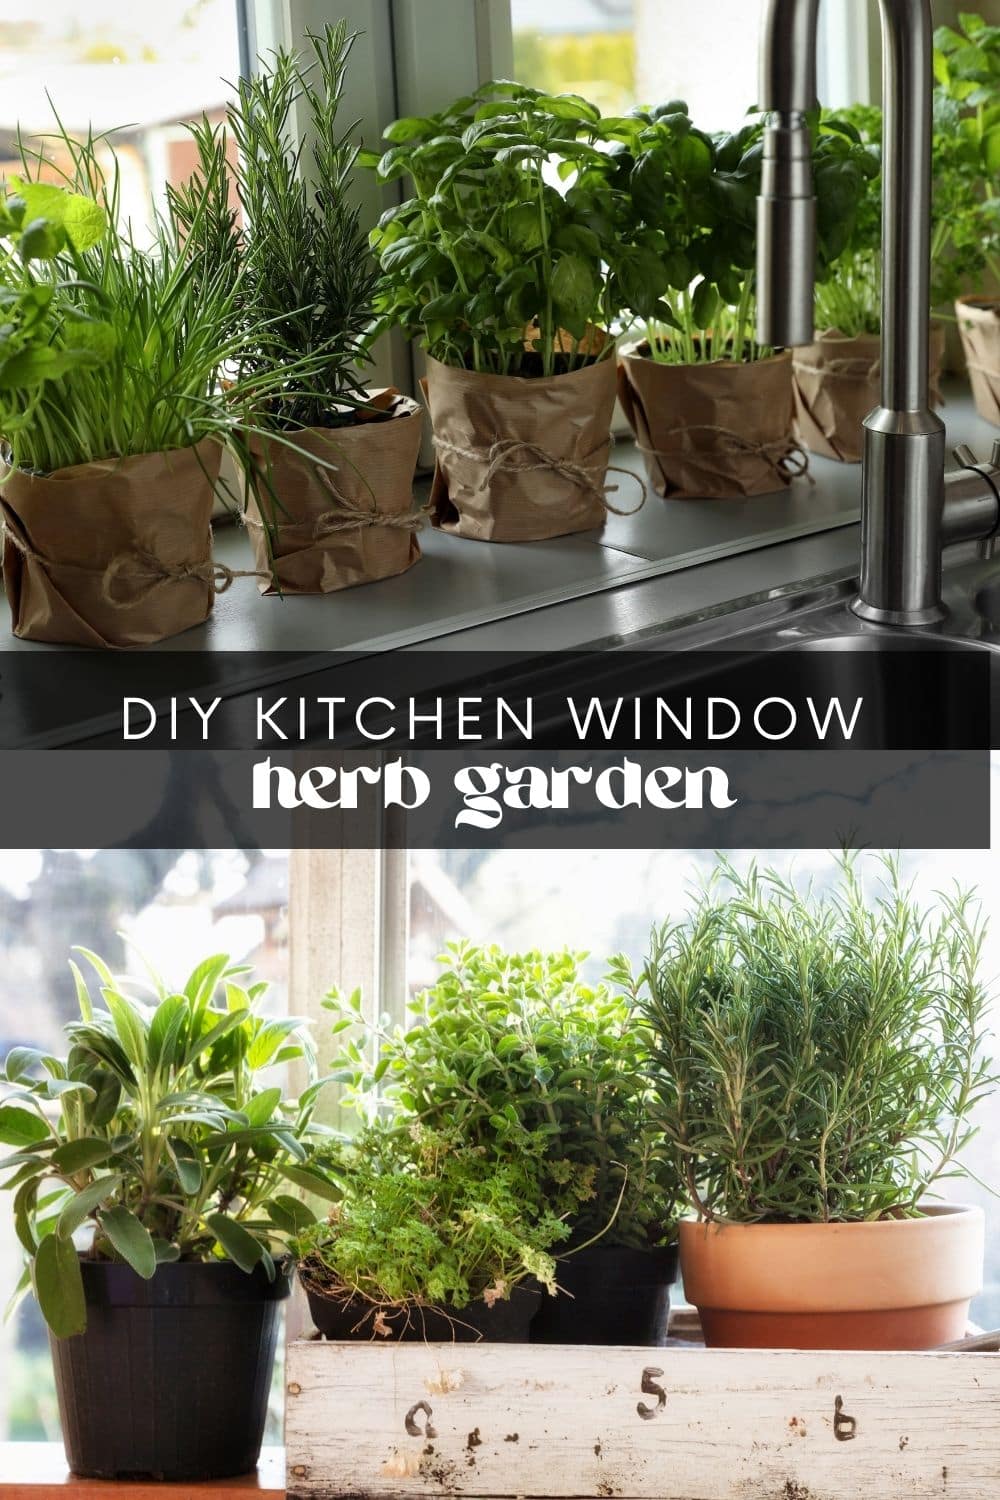 Herbs are a delightful addition to any kitchen and add so much flavor your dishes. If you have don’t have much space, a DIY window herb garden is the perfect solution. They’re easy to construct and cost very little, so you can have your own herb patch in no time!